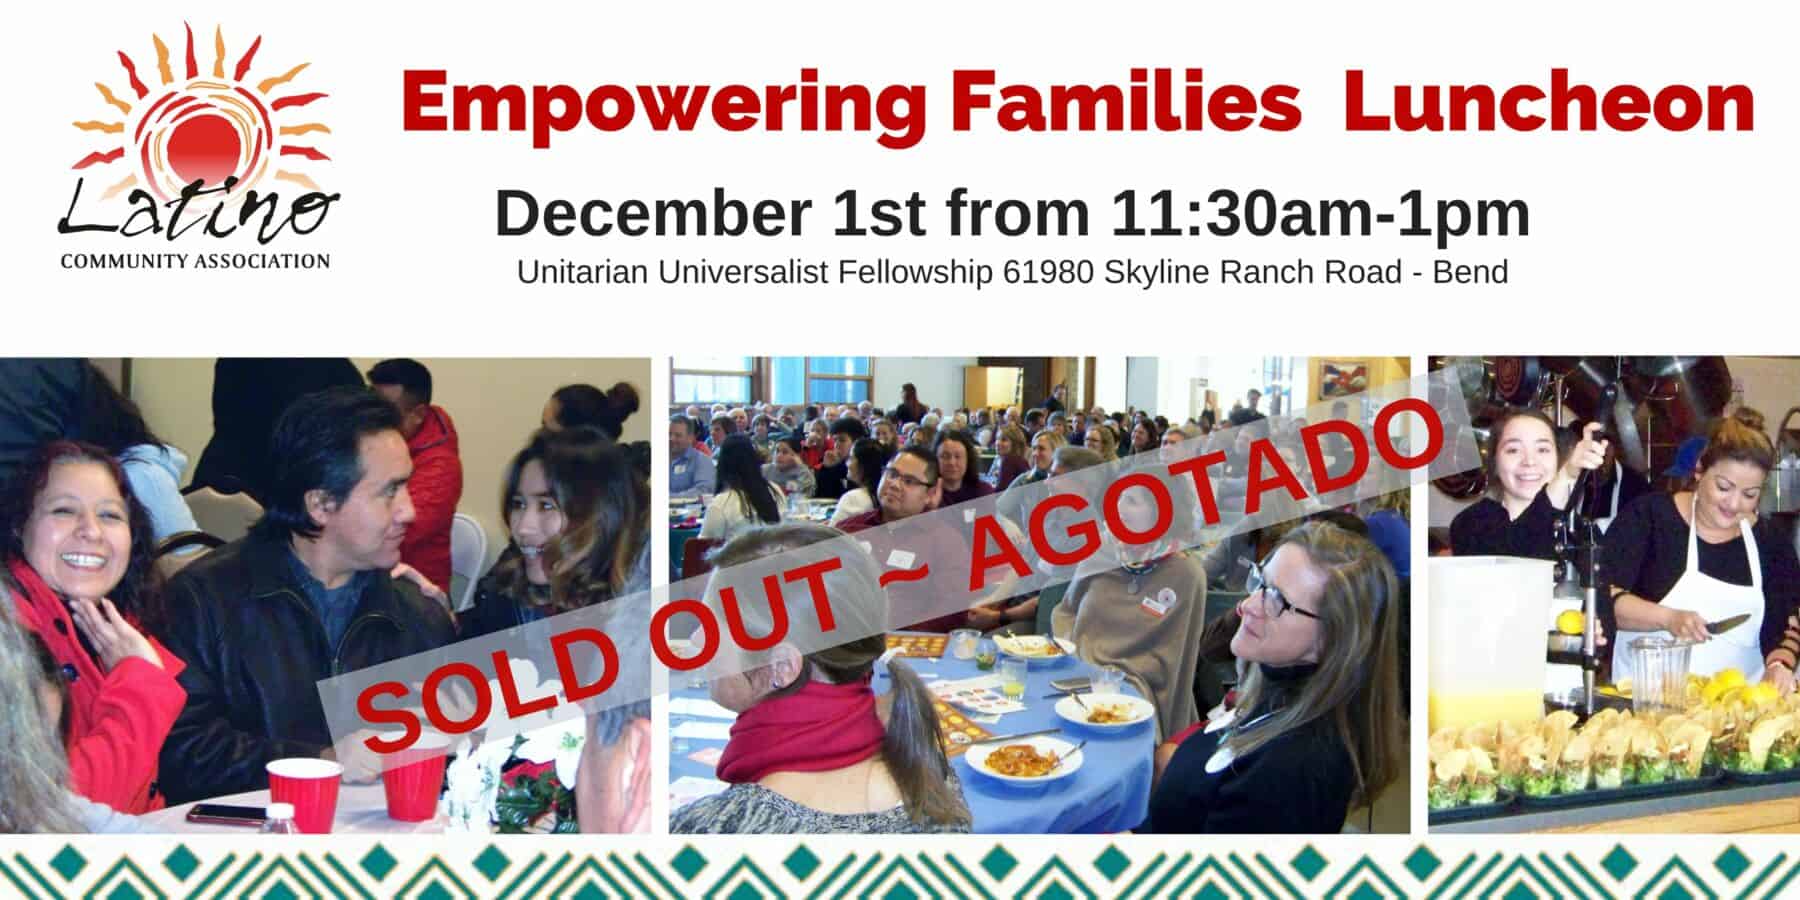 2022 Luncheon SOLD OUT